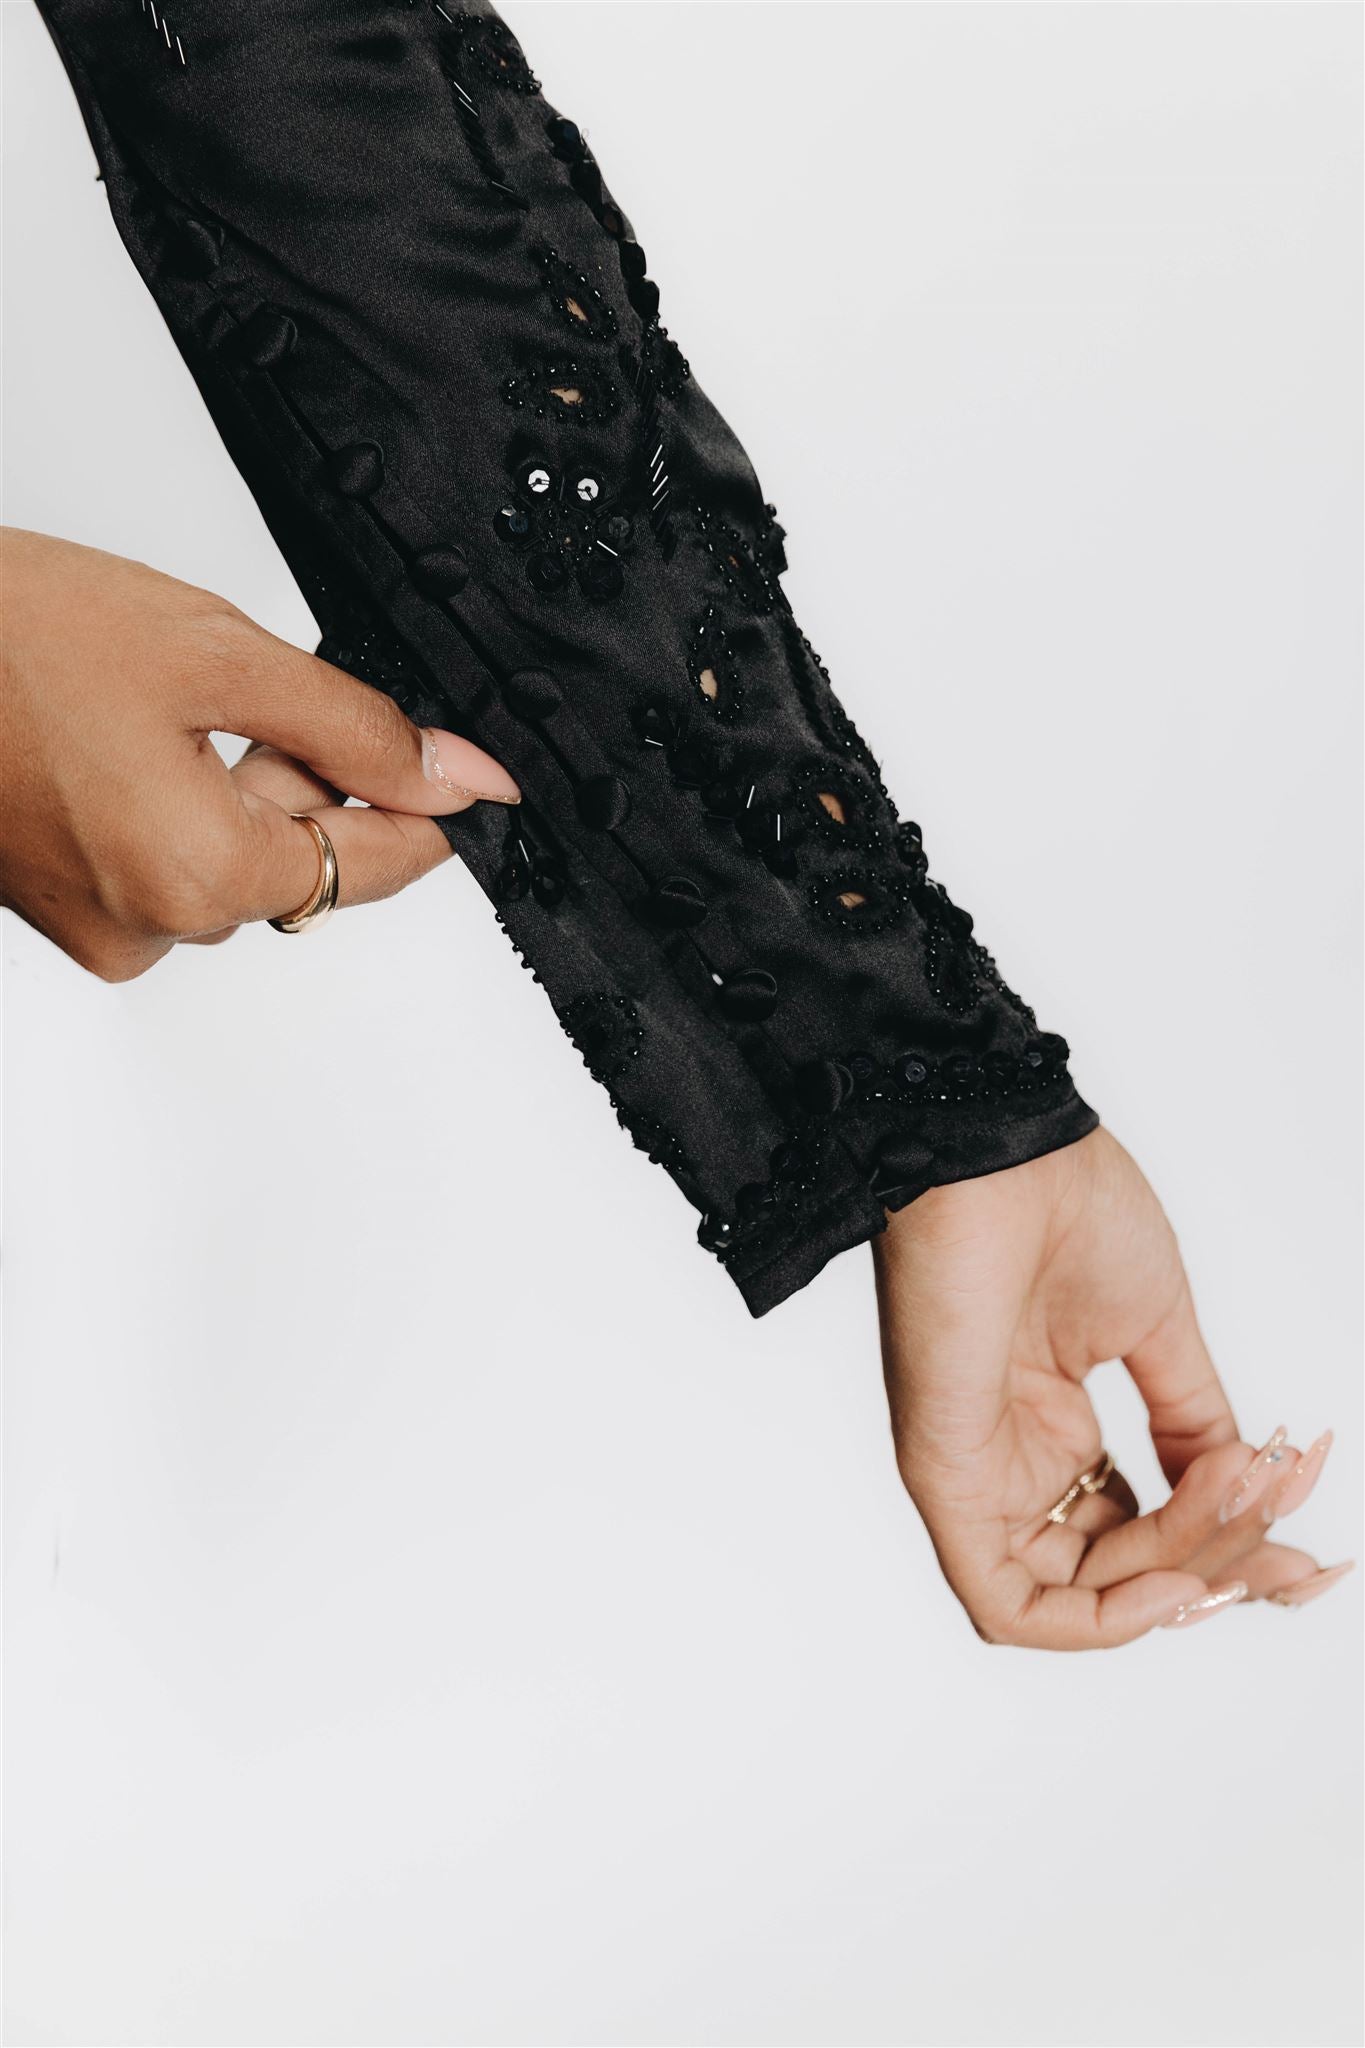 The Rani top is a long sleeve blouse with embellishment and cut work on the sleeves. Dress it up and down, this blouse is the perfect complement to a night out to your next reception. 